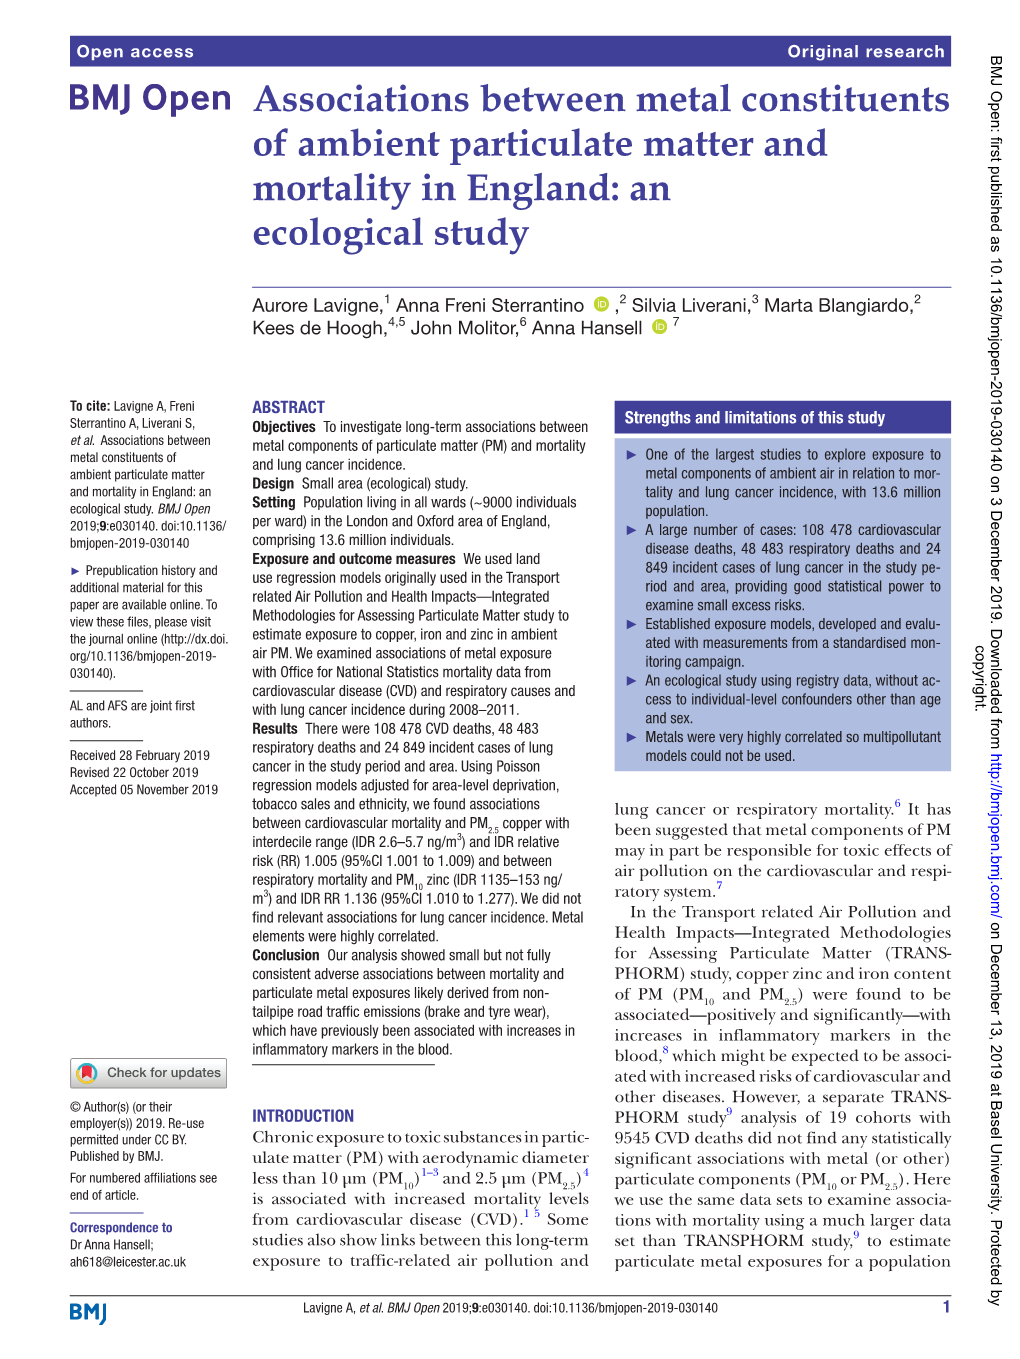 Associations Between Metal Constituents of Ambient Particulate Matter and Mortality in England: an Ecological Study